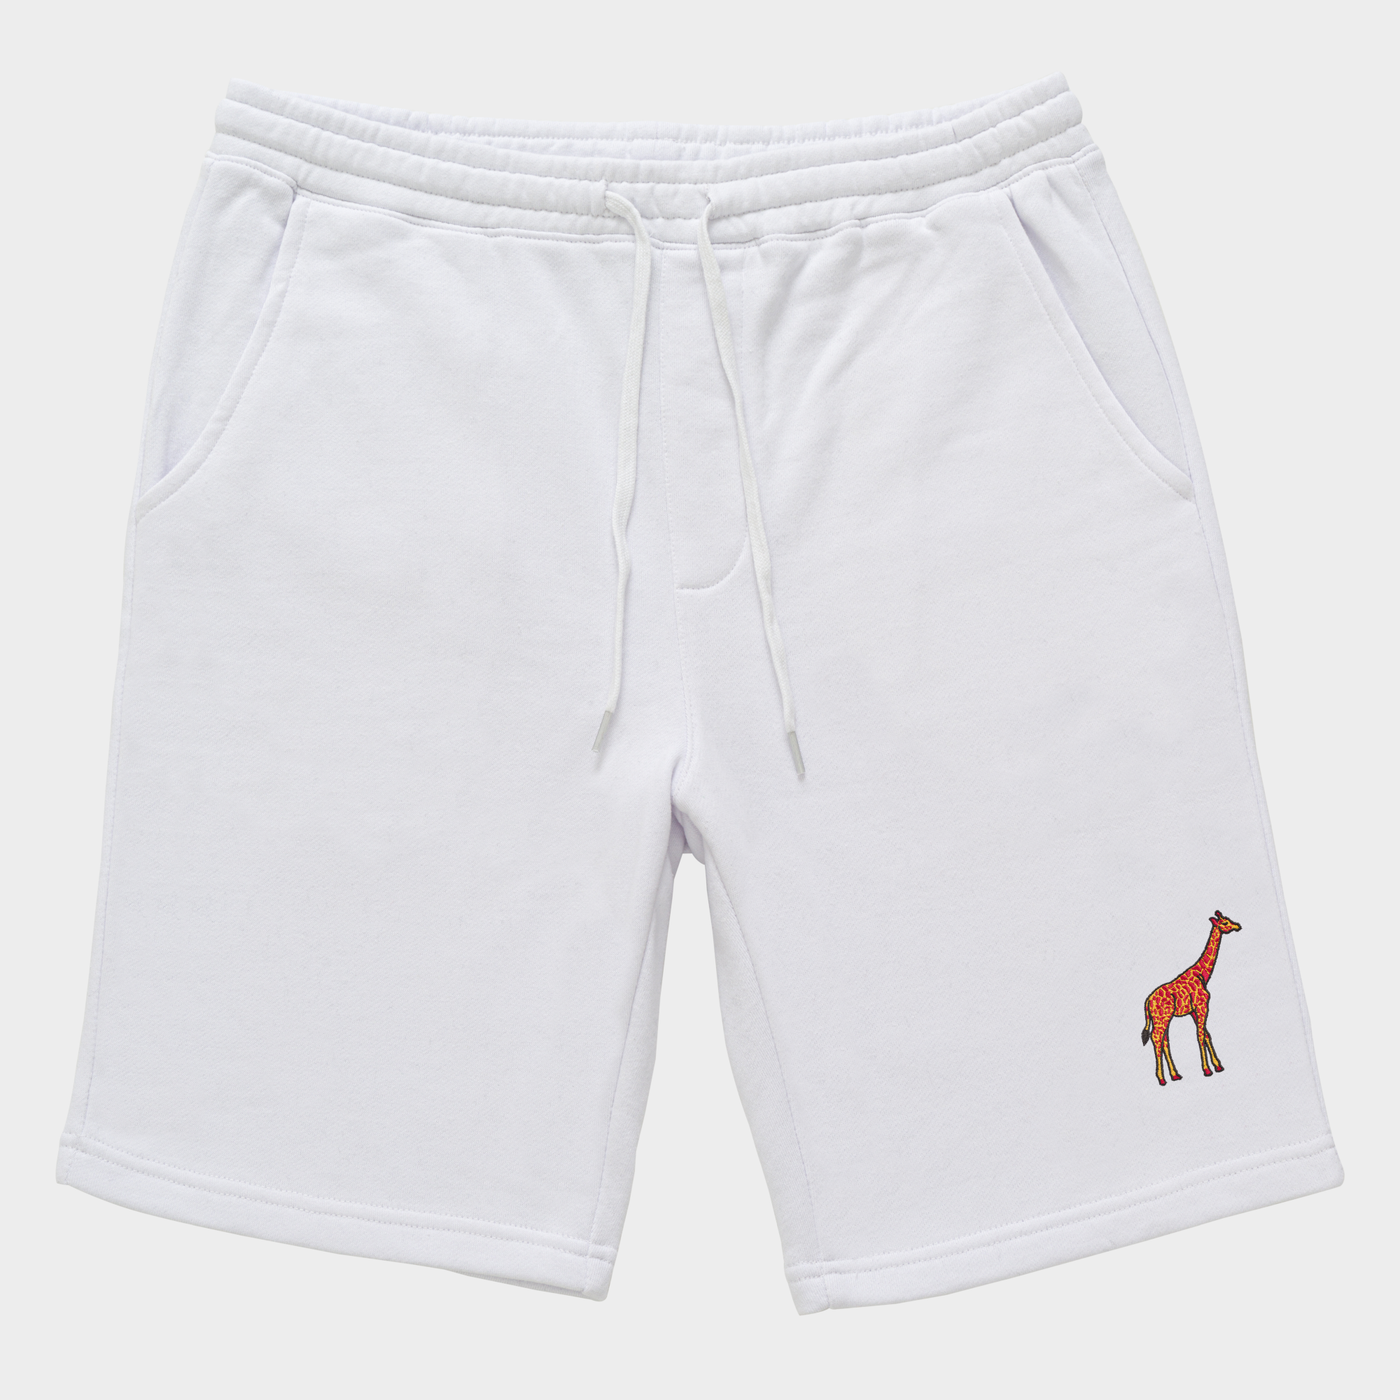 Bobby's Planet Men's Embroidered Giraffe Shorts from African Animals Collection in White Color#color_white